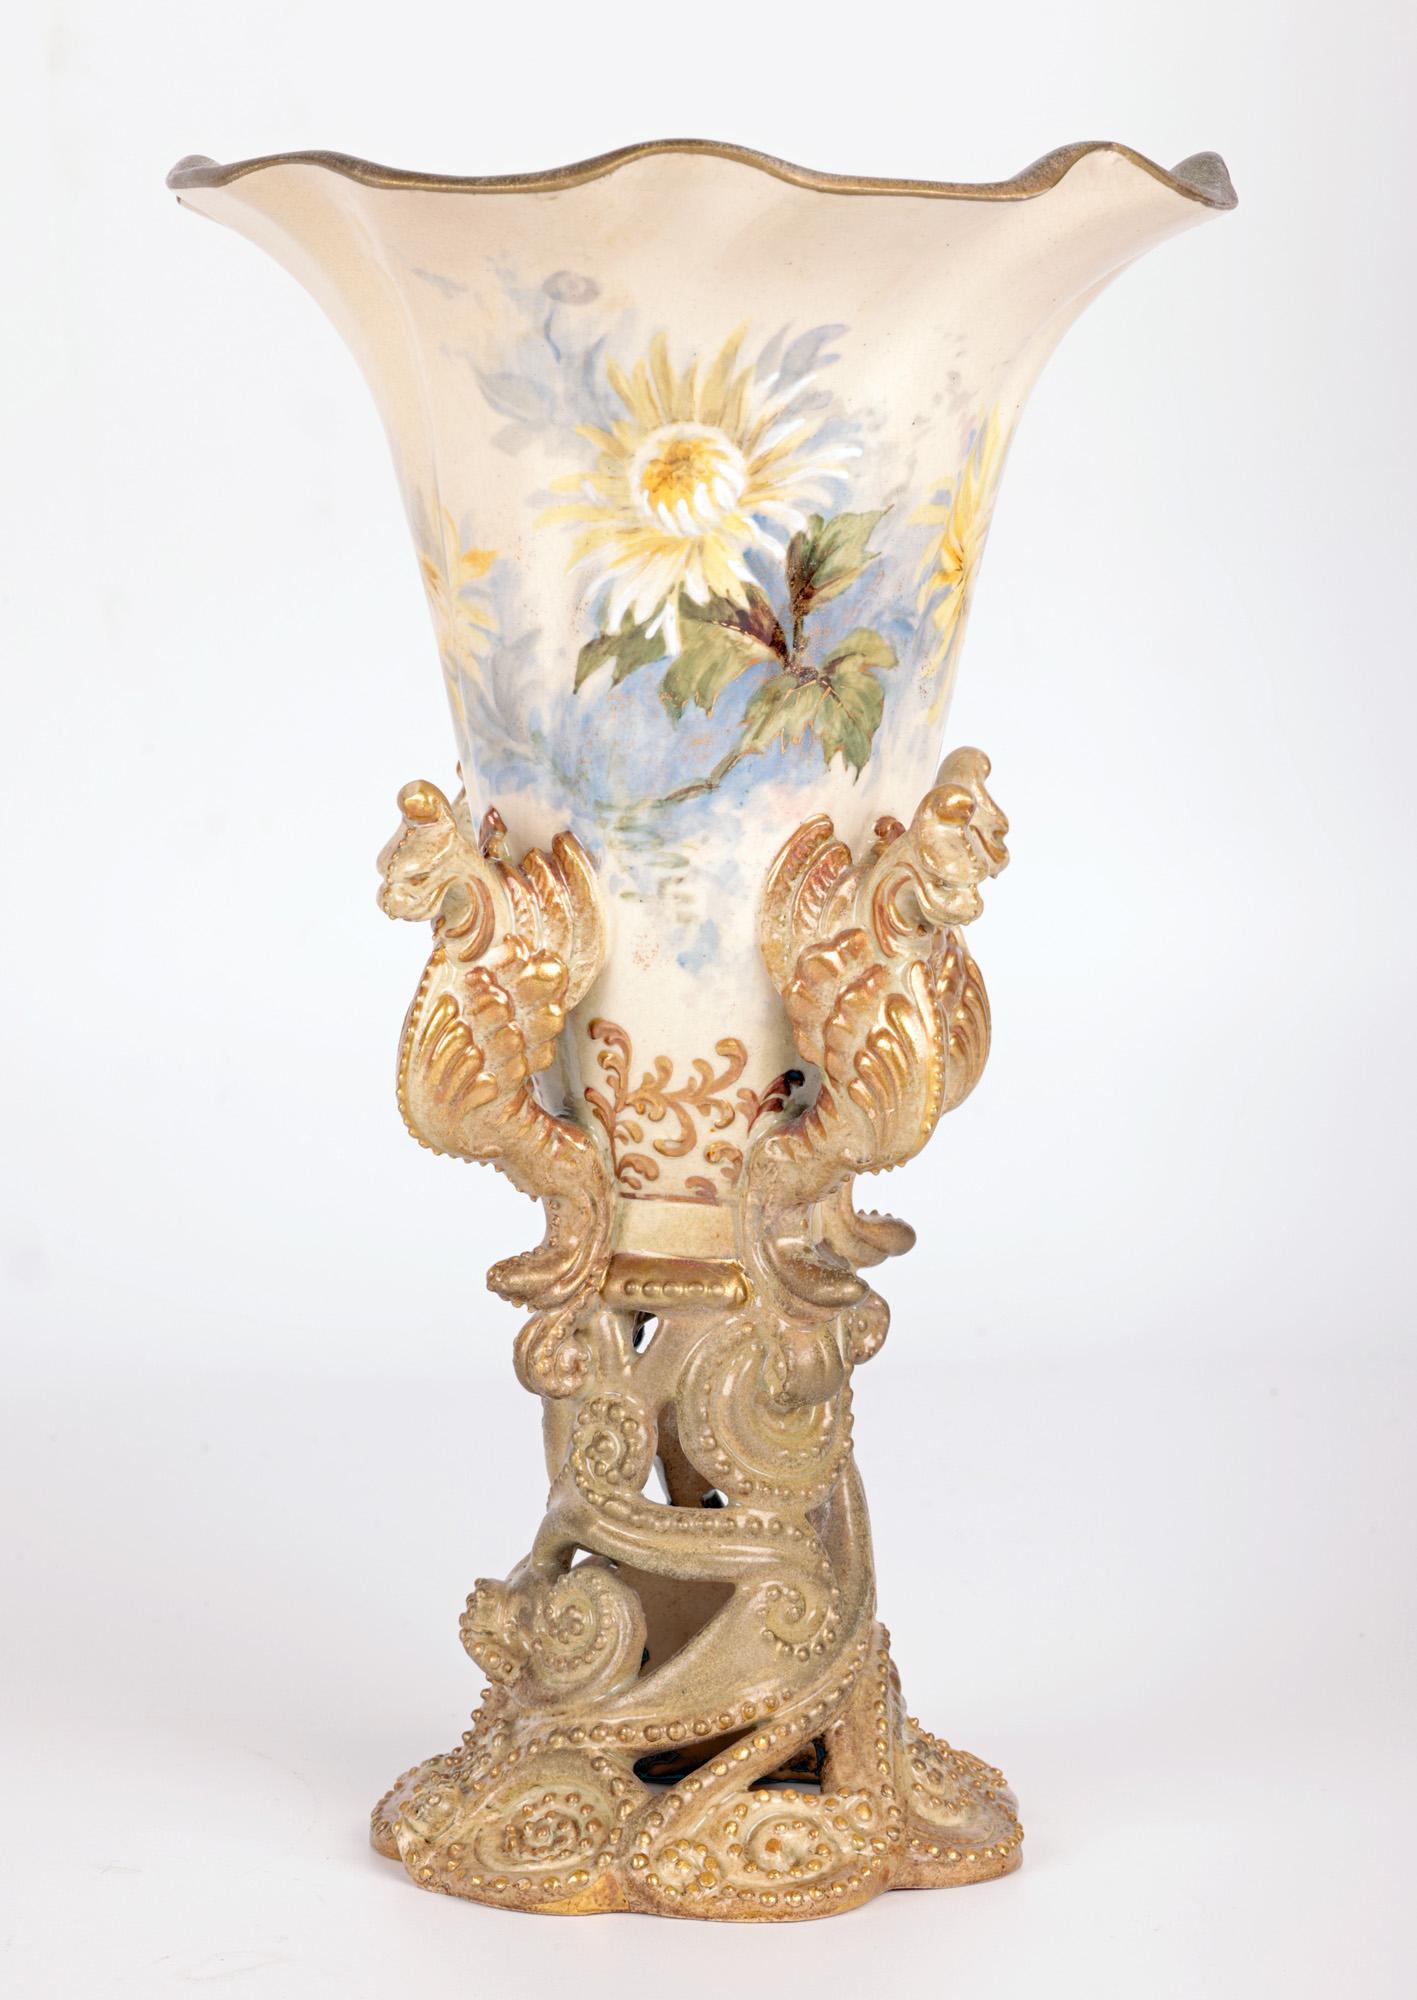 Crown Doulton Lambeth Floral Painted Trumpet Vase With Griffins For Sale 11